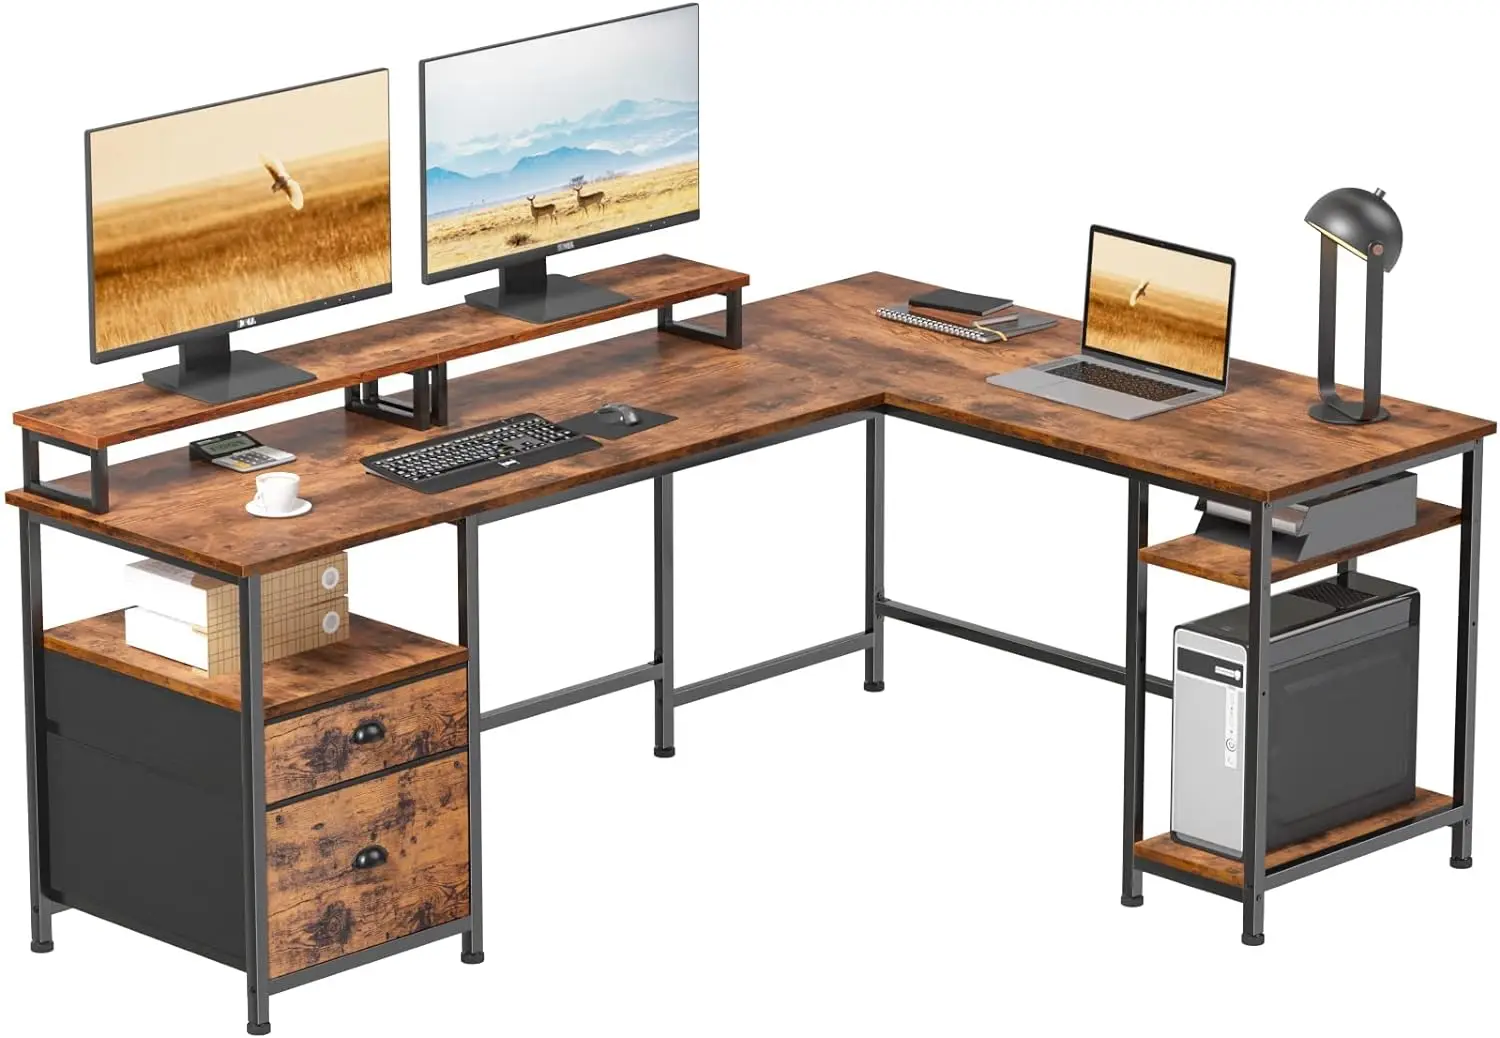 

Furologee 66" L Shaped Computer Desk with Shelves, Reversible Corner Gaming Desk with File Drawer and Dual Monitor Stand, Large